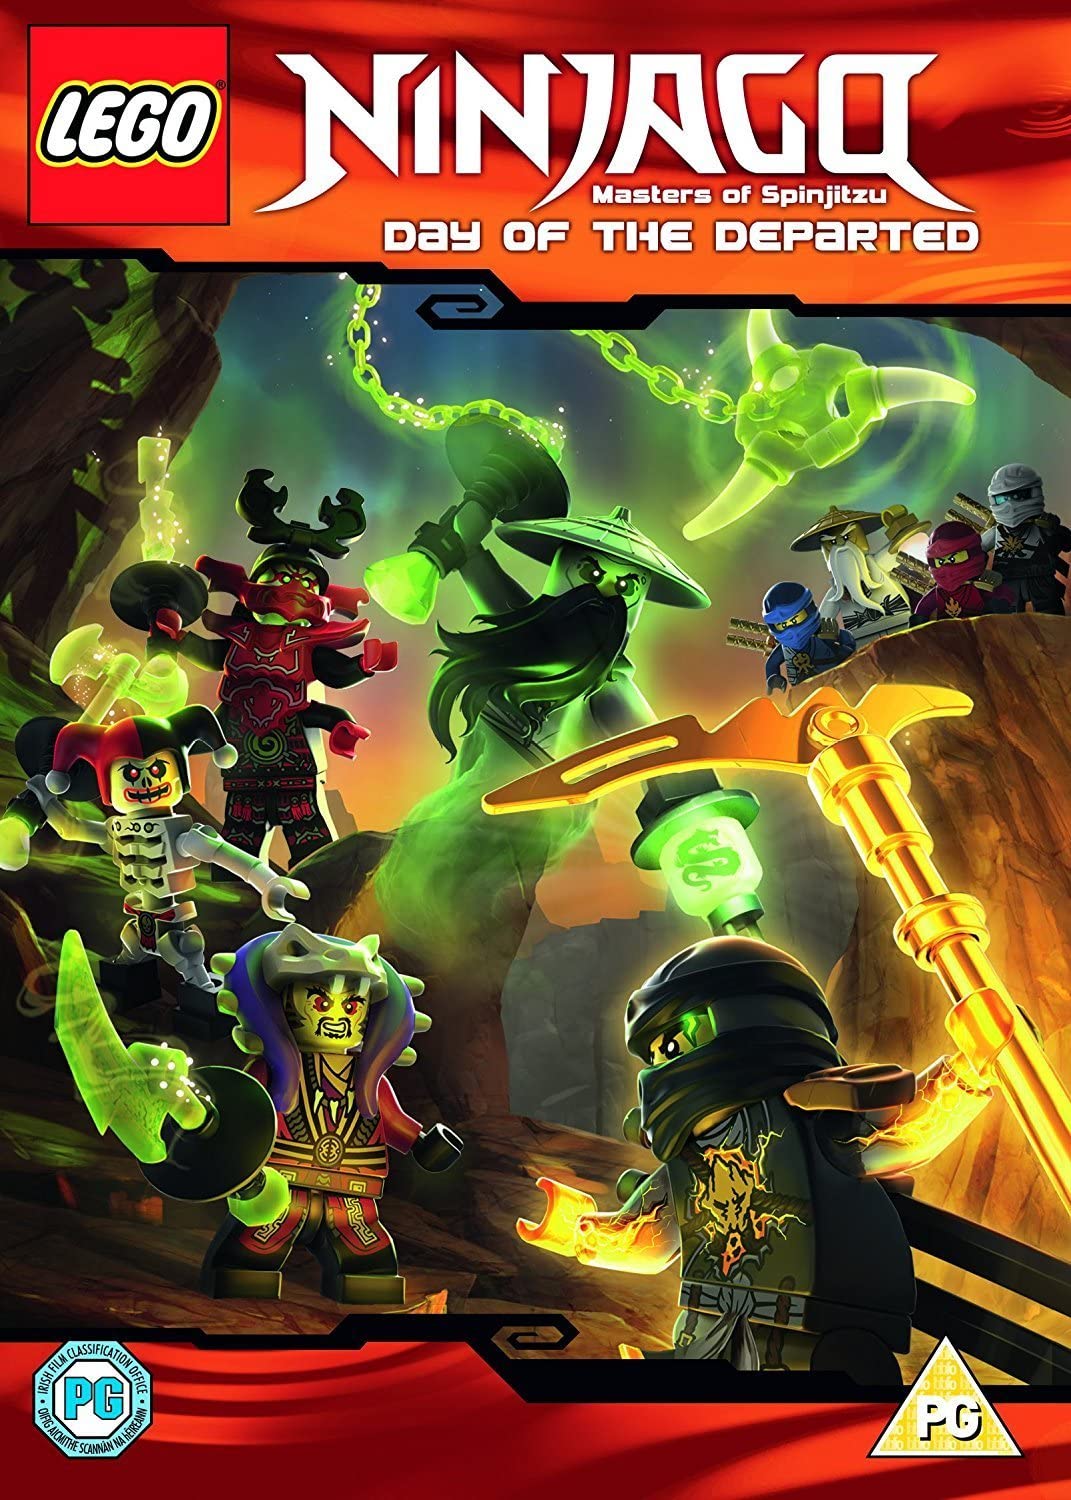 LEGO NINJAGO: DAY OF DEPARTED S) [2018] - Adventure/Family [DVD]